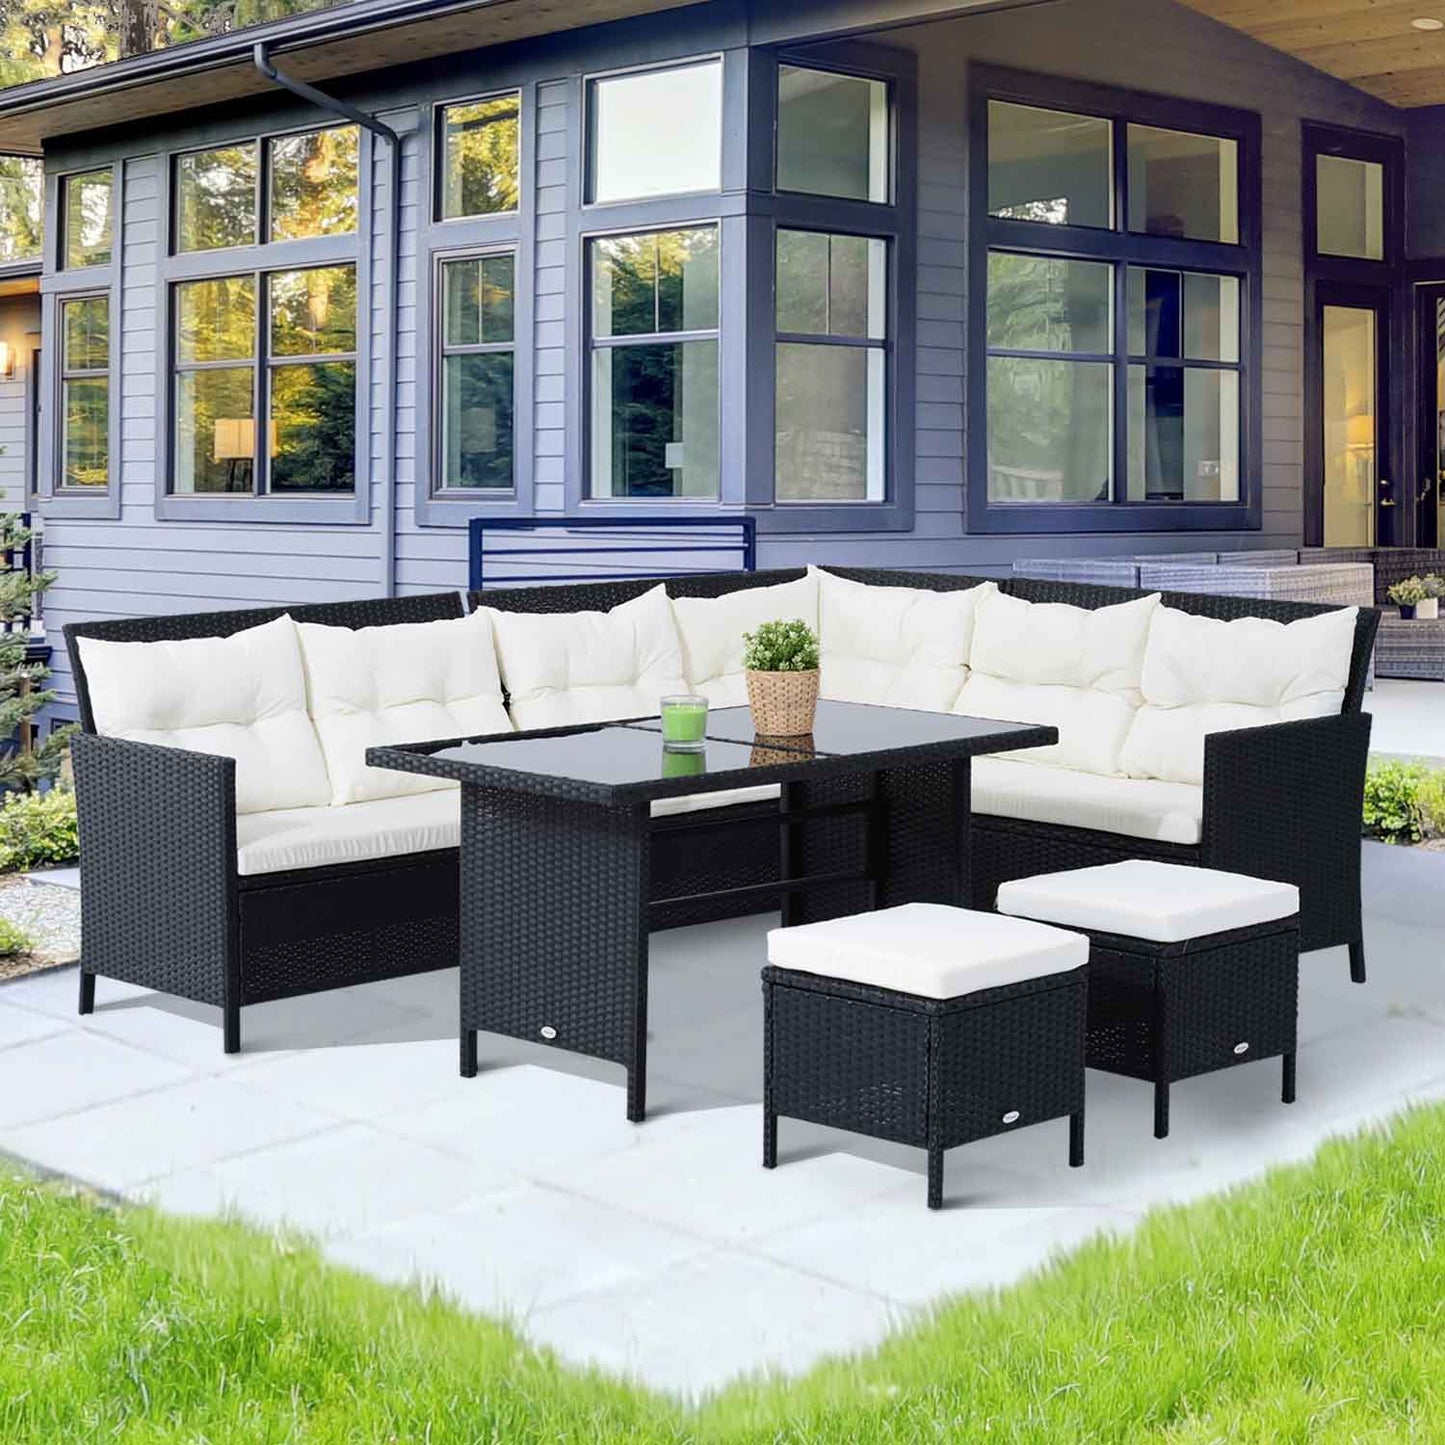 LUXEE | Rattan Garden Table with L-Shaped Sofa and Stools